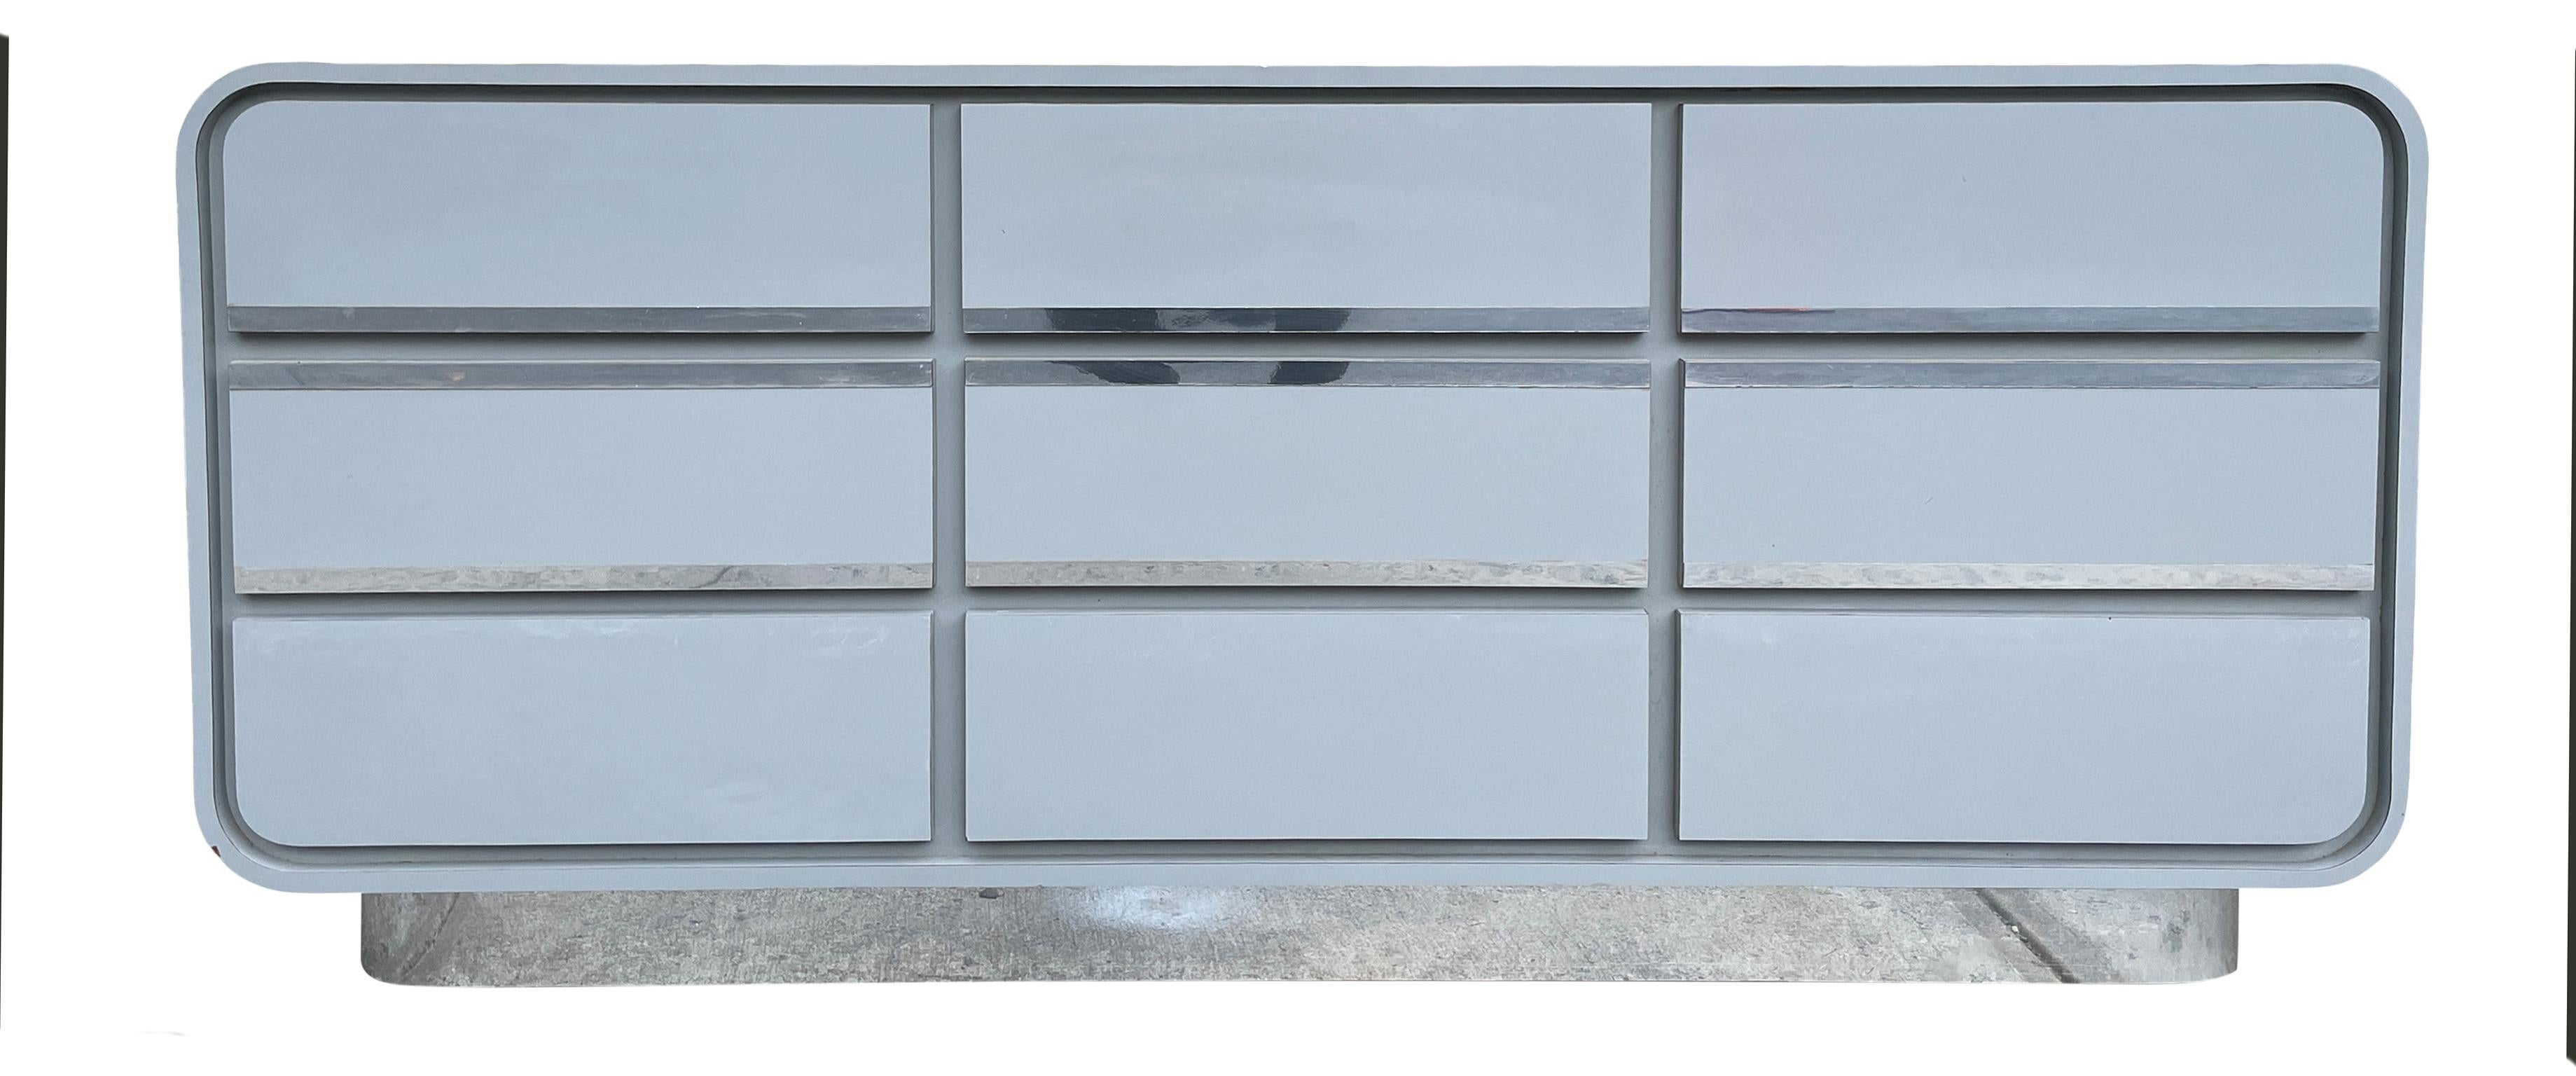 Very long matte white grayish blue gloss laminate and chrome trim waterfall design custom 9 drawer dresser credenza, circa 1980s custom made. Very clean inside and out. Look at photos. This unit is built very high quality sturdy and structural all